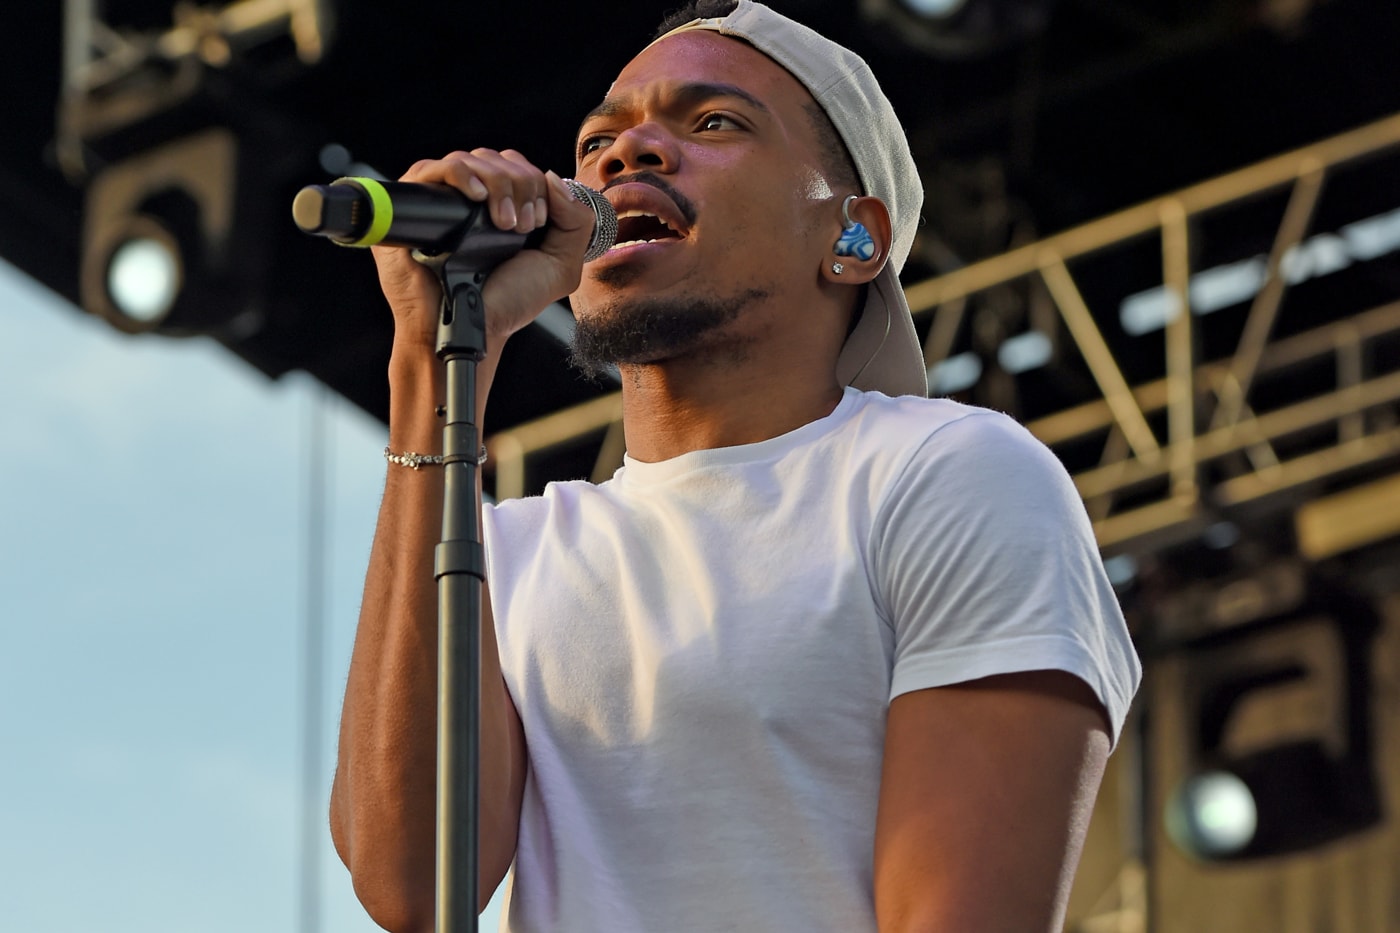 chance-the-rapper-coloring-book-billboard-200-streaming